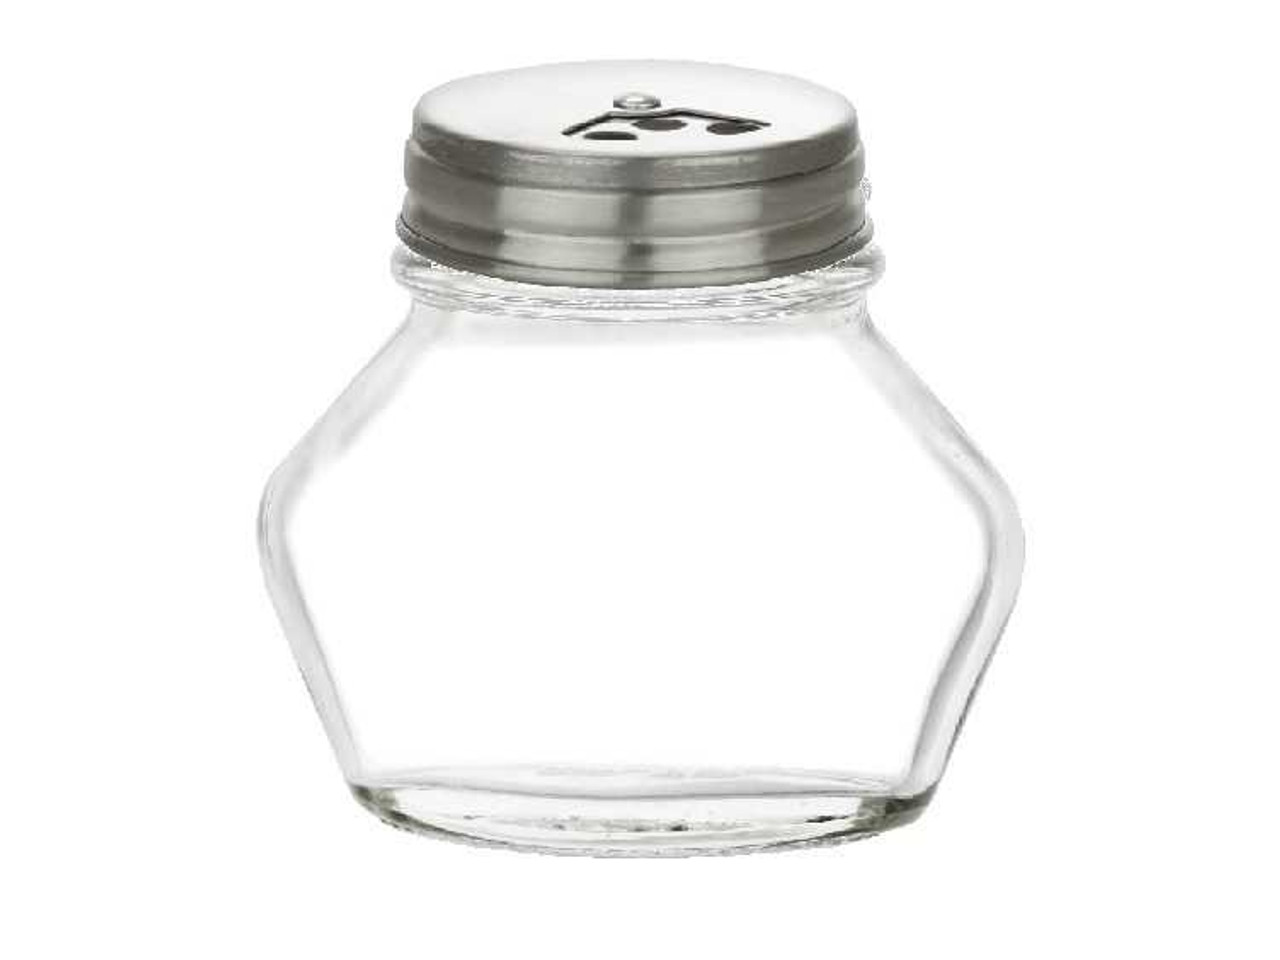 https://cdn11.bigcommerce.com/s-1ybtx/images/stencil/1280x1280/products/1219/6563/2-oz-Glass-Spice-Jars-with-Stainless-Steel-Spice-Caps_5021__96308.1674335577.jpg?c=2